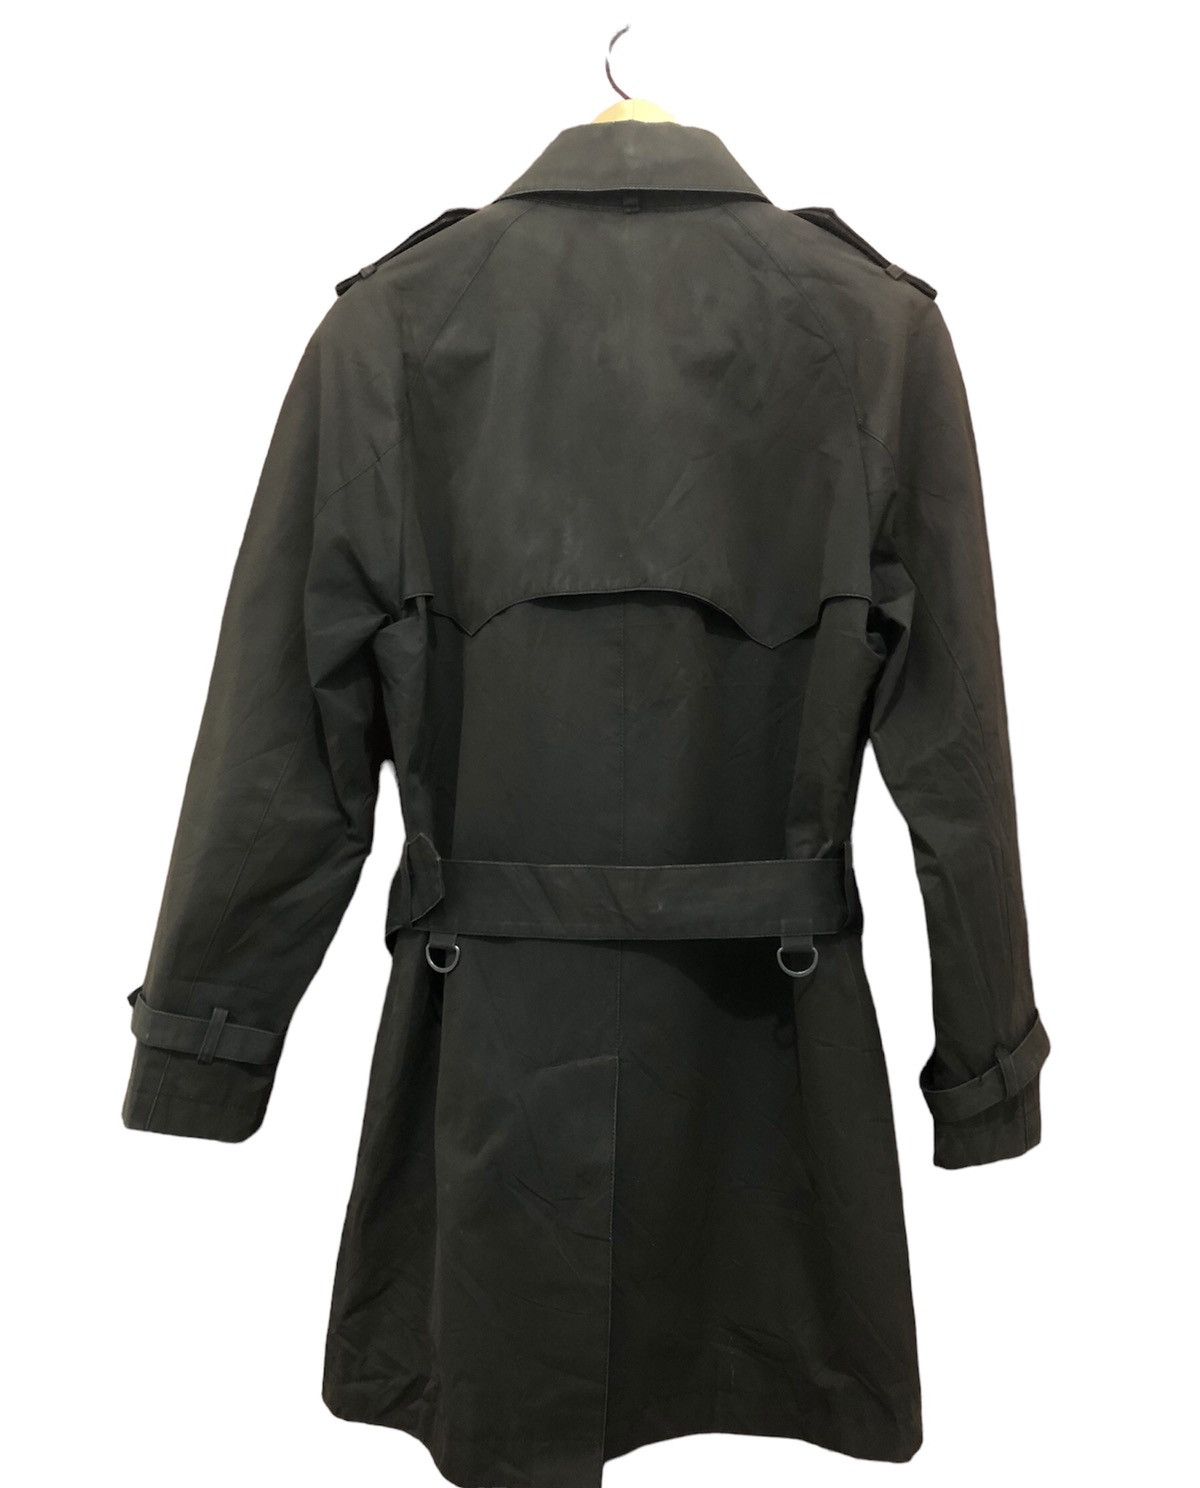 Paul Smith Trench Coat Dark Brown Colour - 2